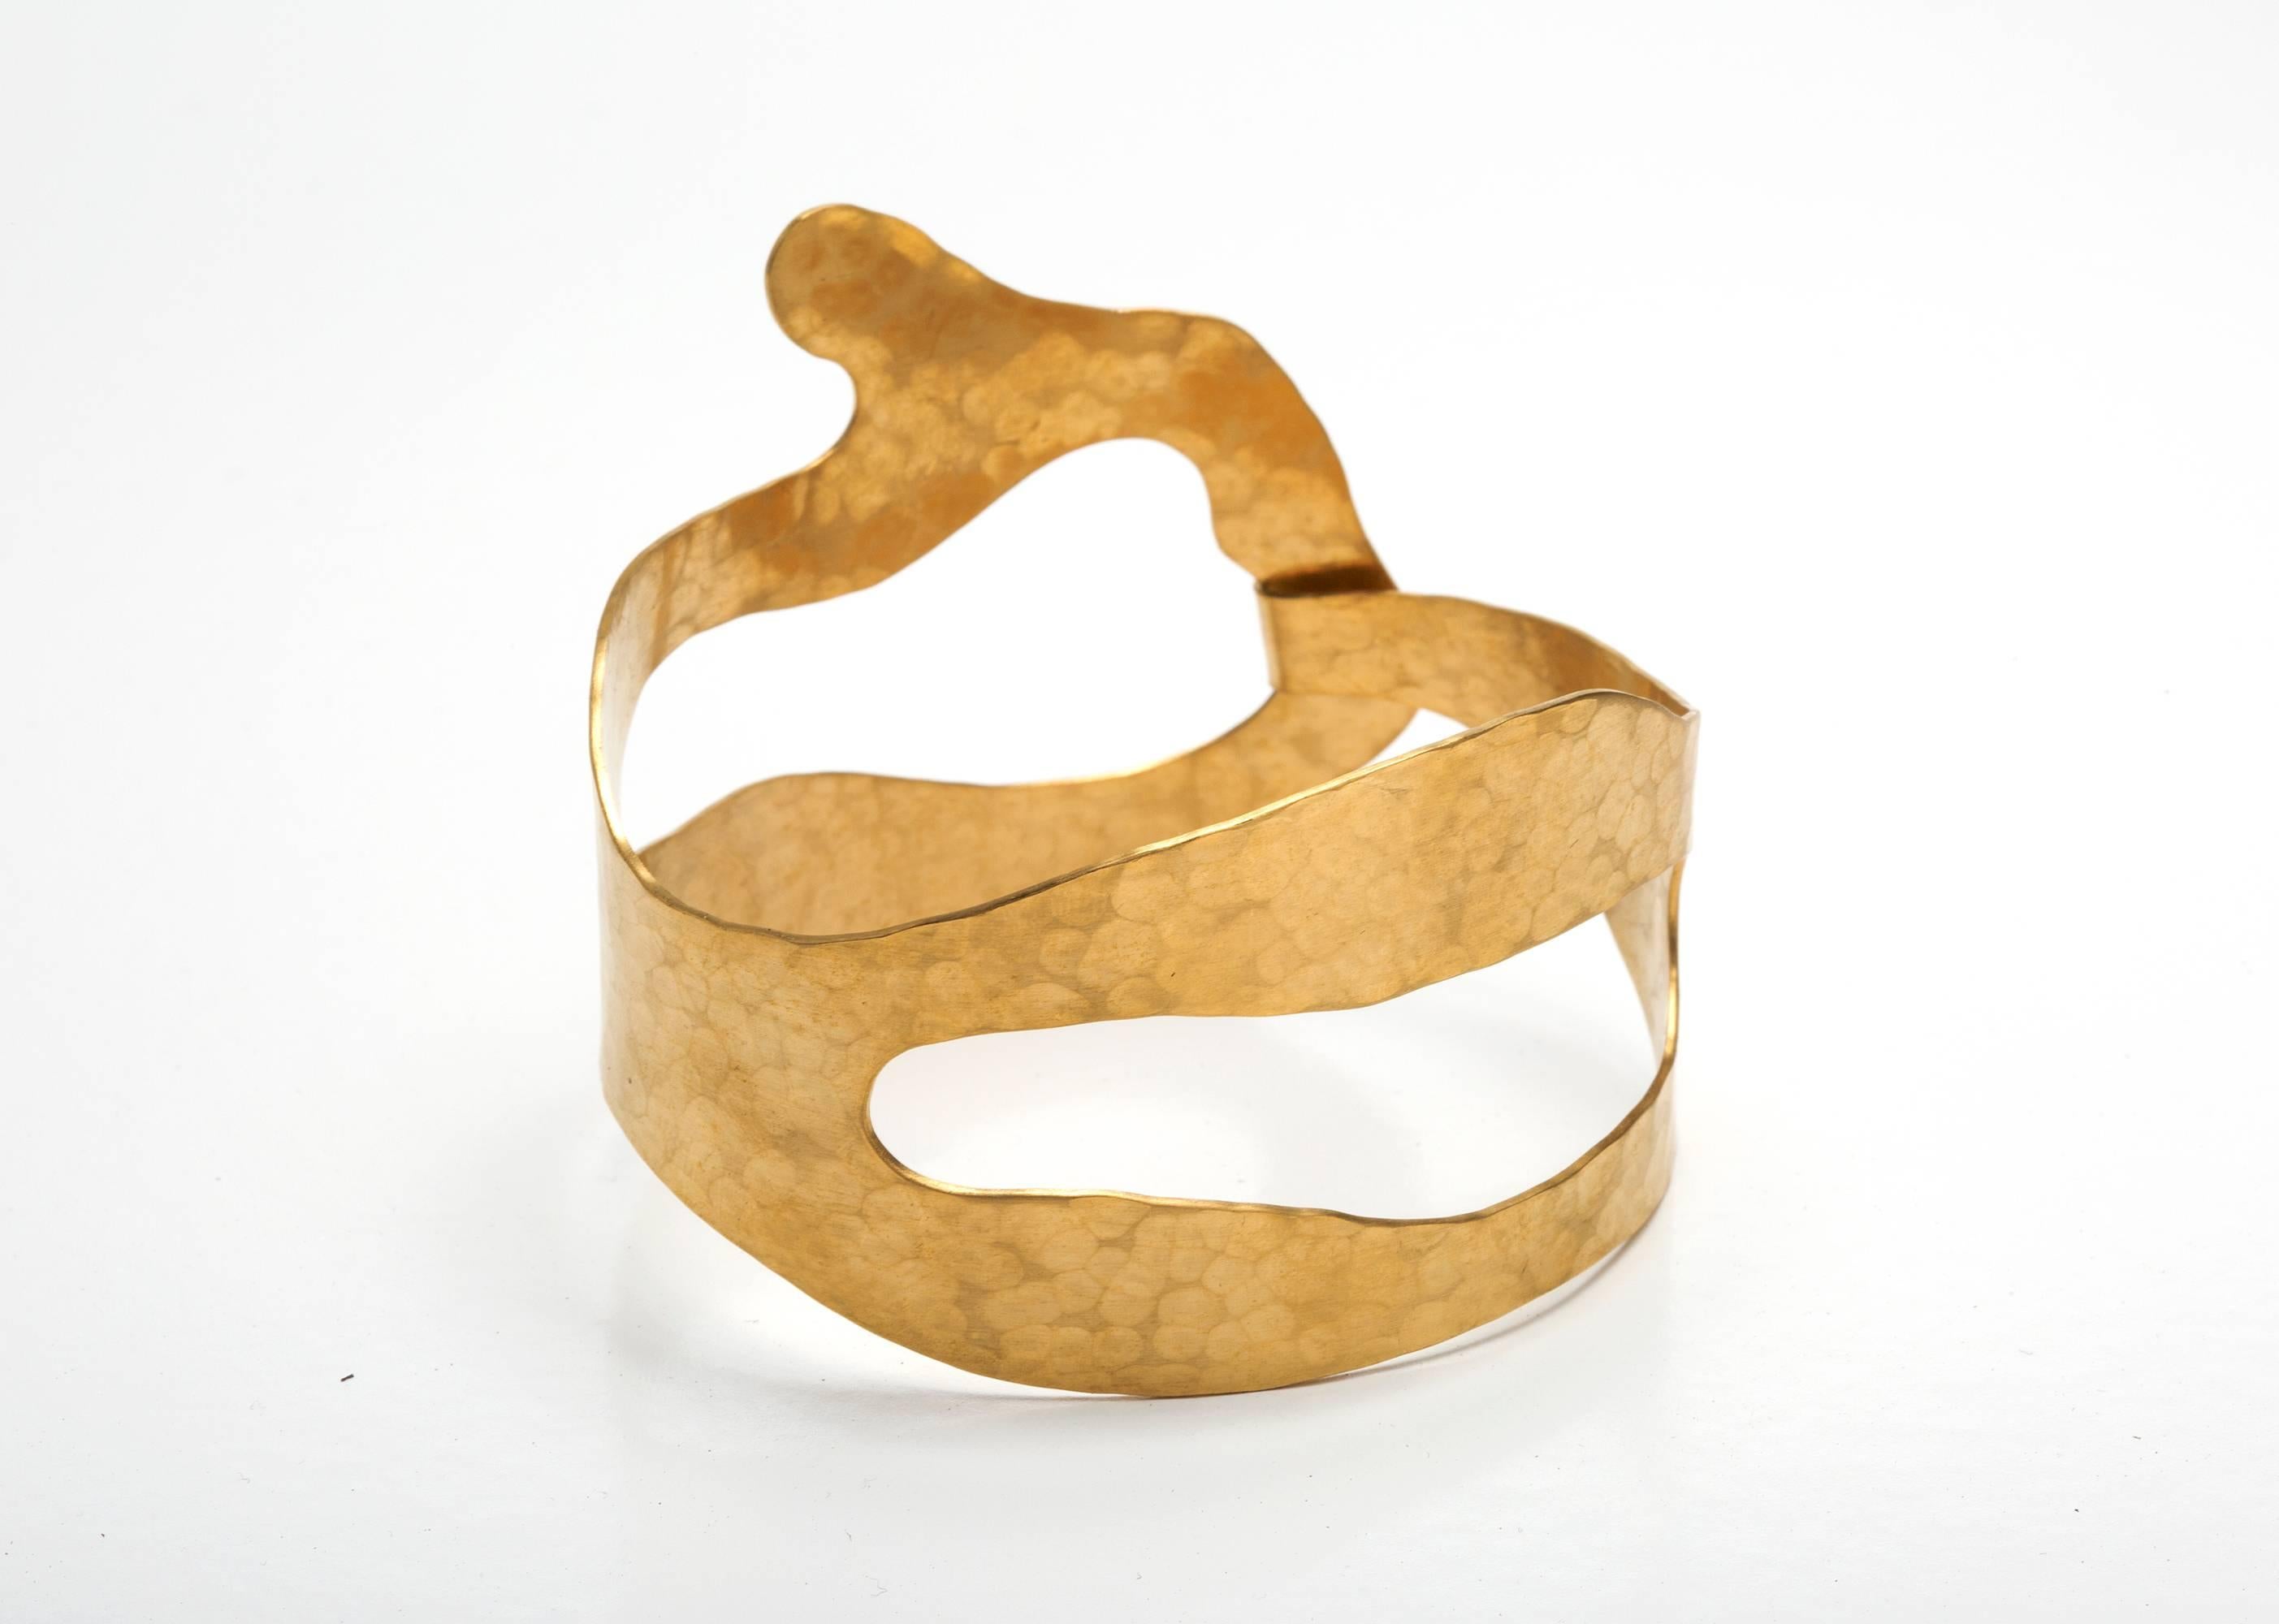 Gold-plated brass and hand-hammered Bracelet by Jacques Jarrige.

Jarrige's jewelry is more companion than ornament, heightening one's physical awareness and bestowing the pleasure of inhabiting a well-built structure — a structure so light that